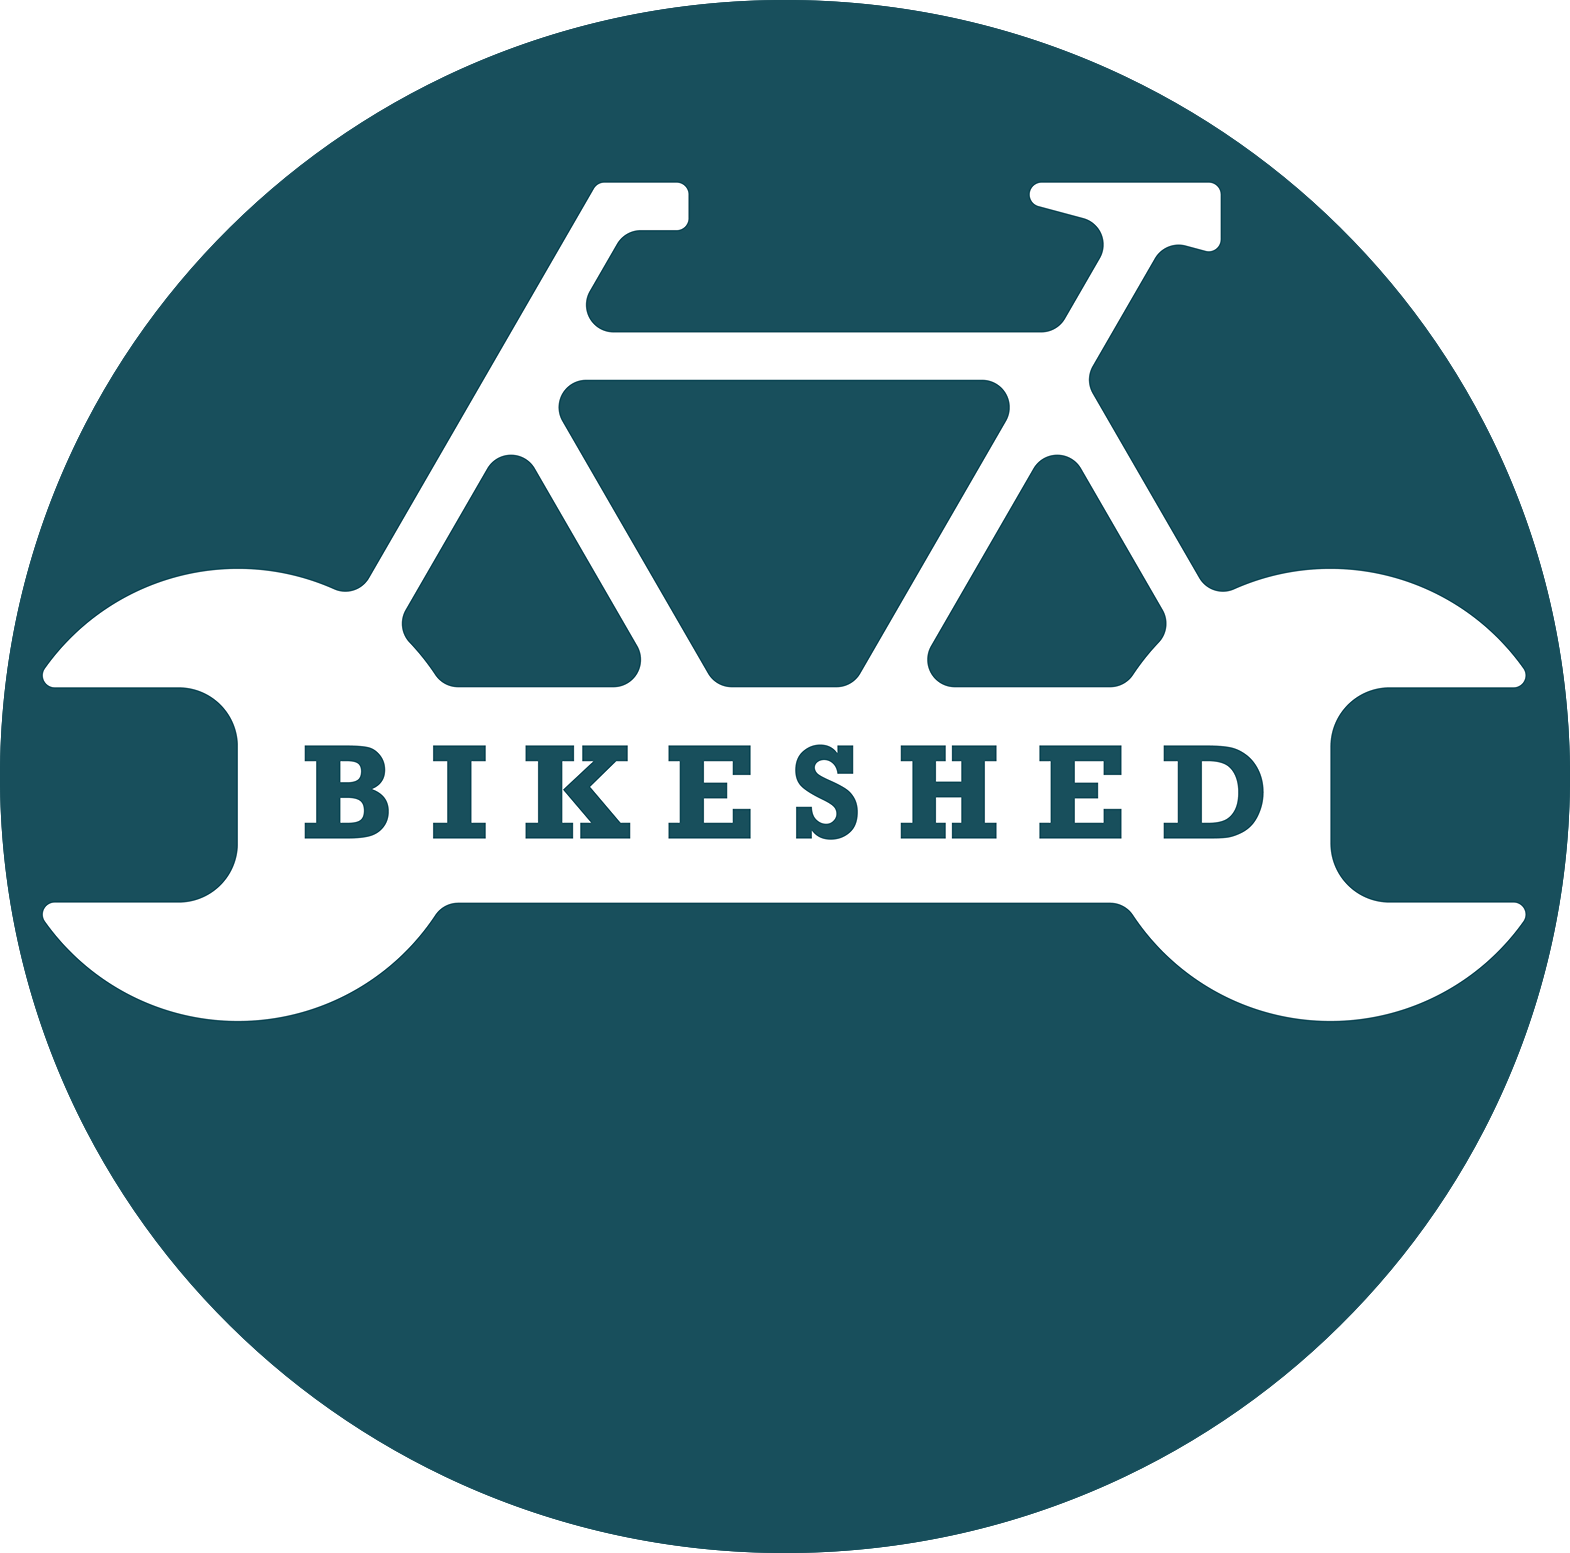 the bike shed ceres.png